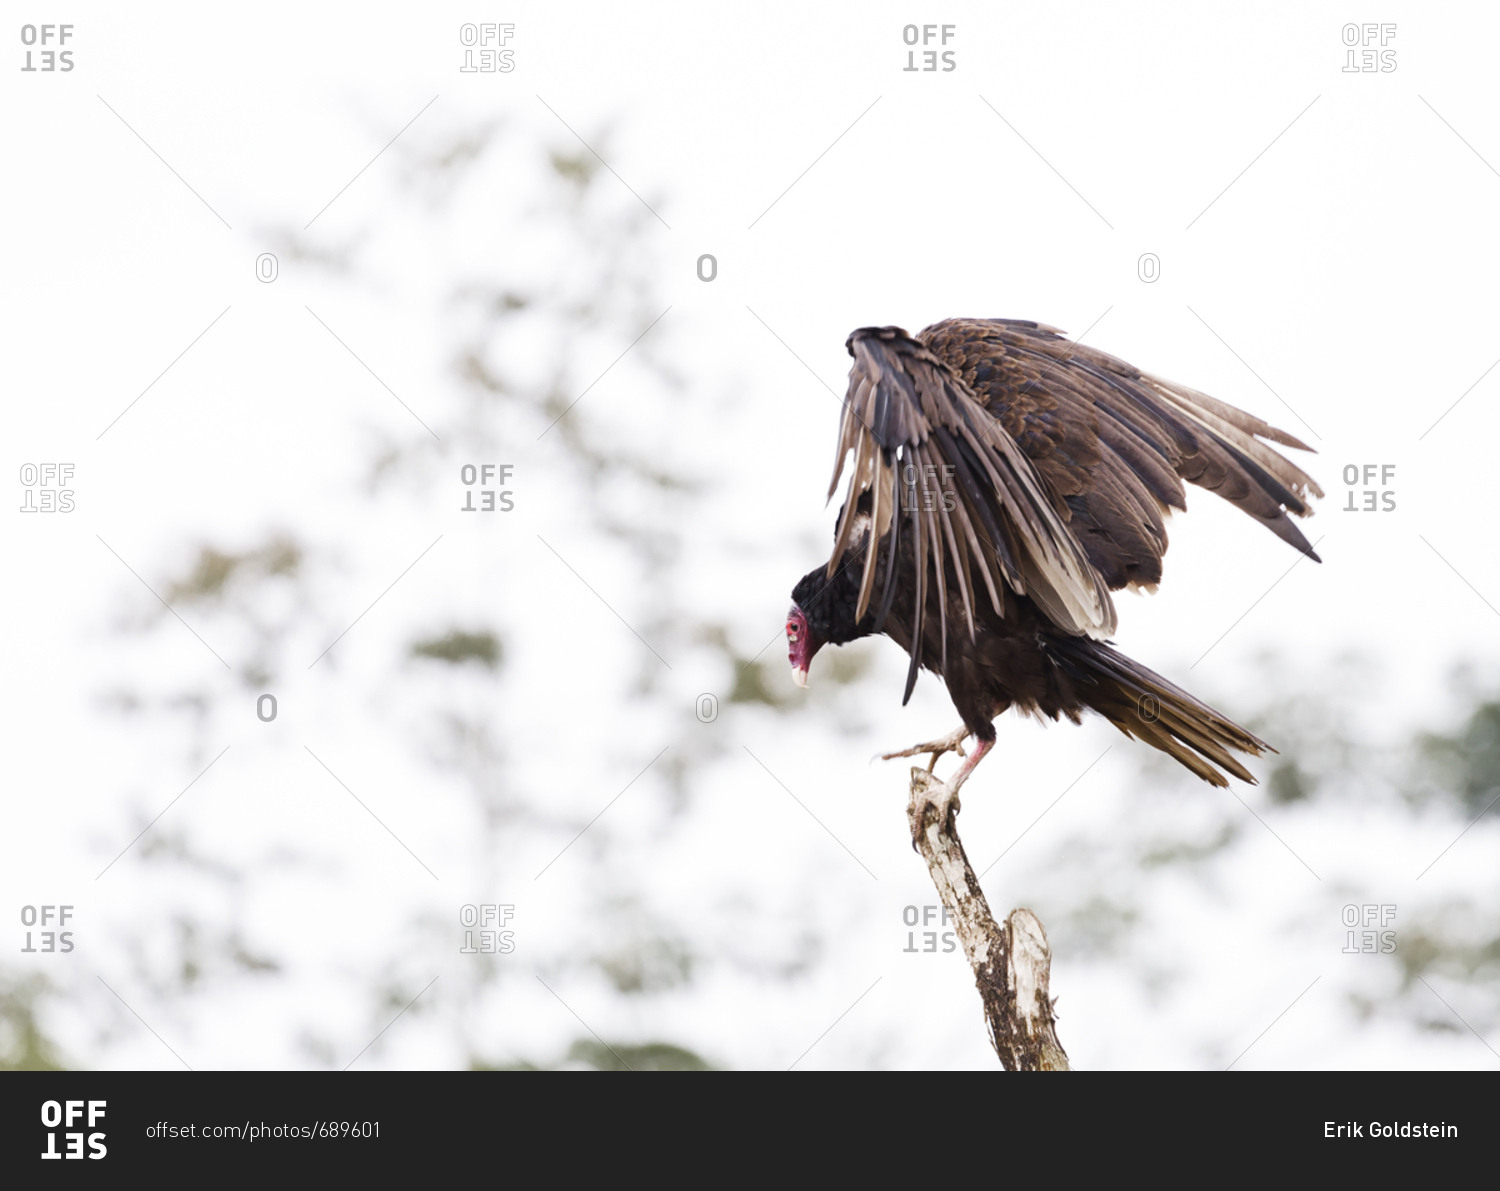 Turkey vulture spreading wings as it tries to balance on branch in Costa Rica